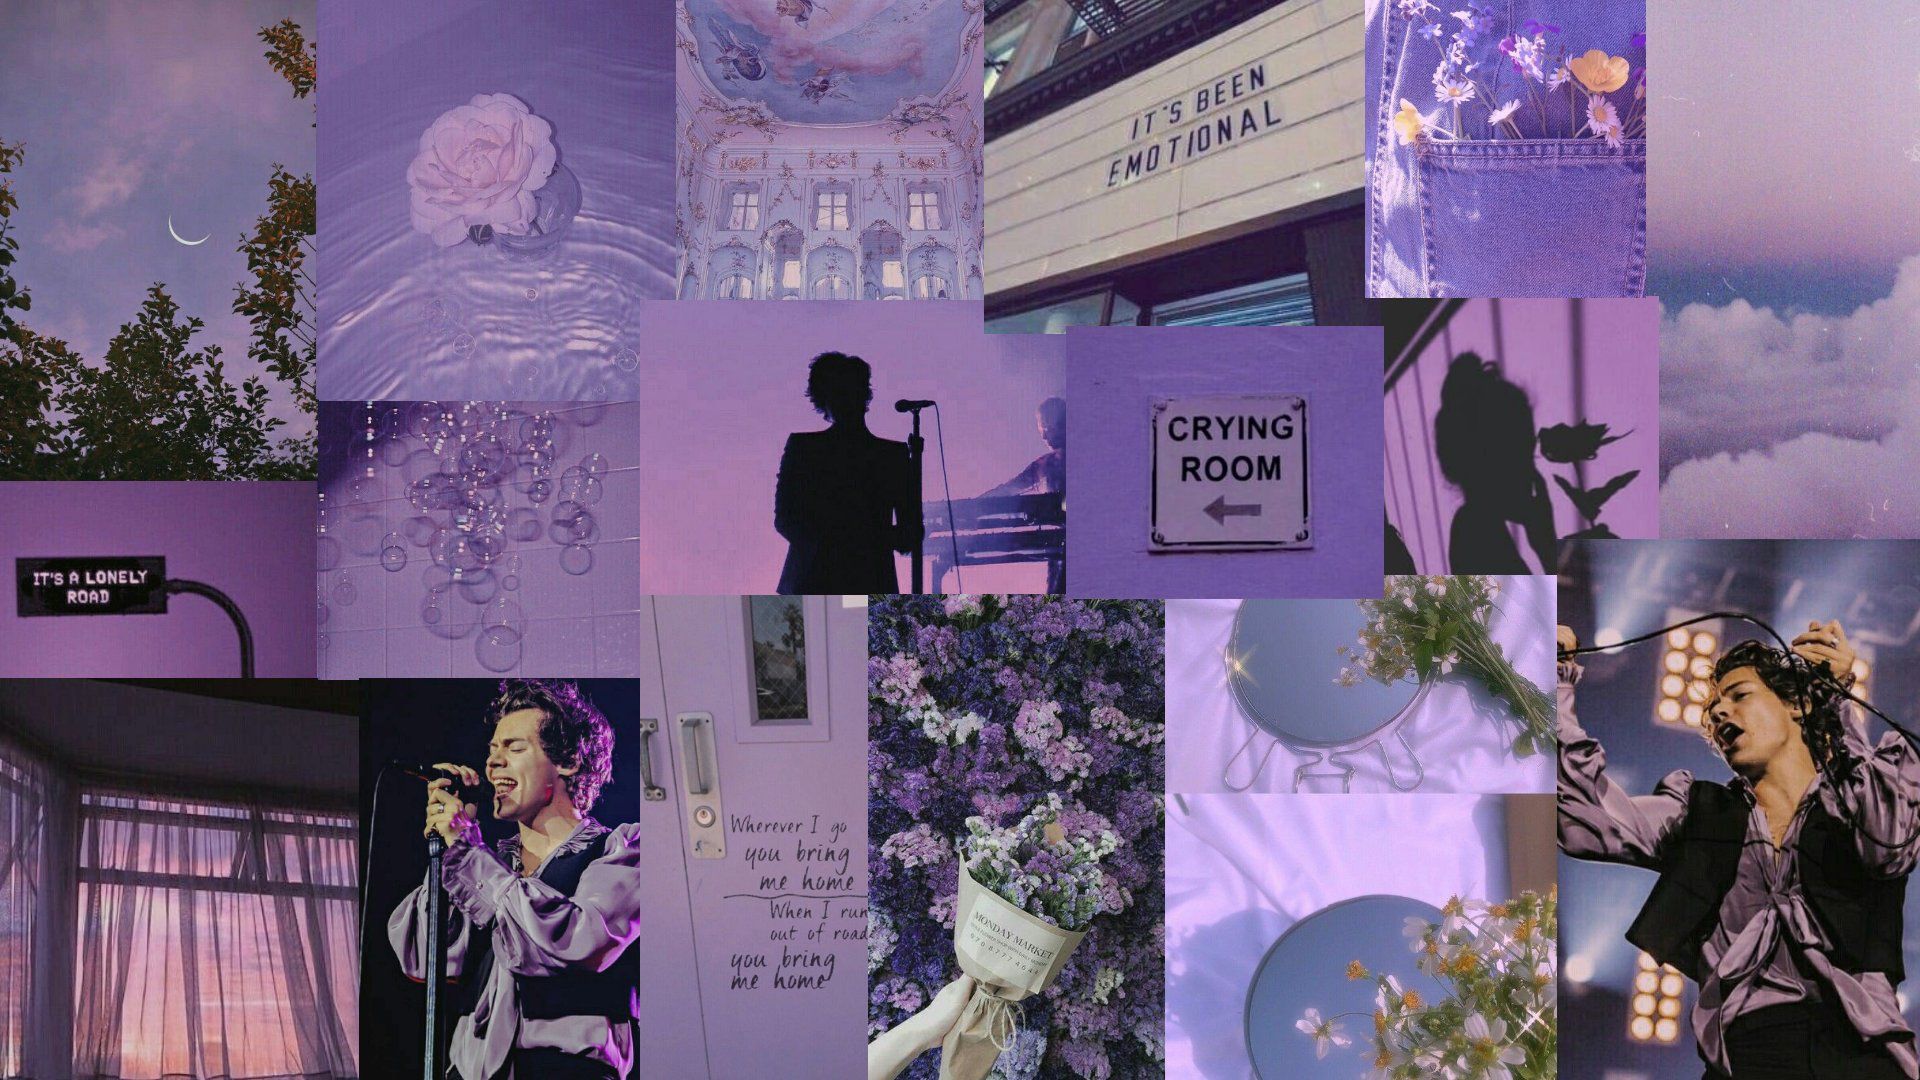 A collage of purple aesthetic images - Harry Styles